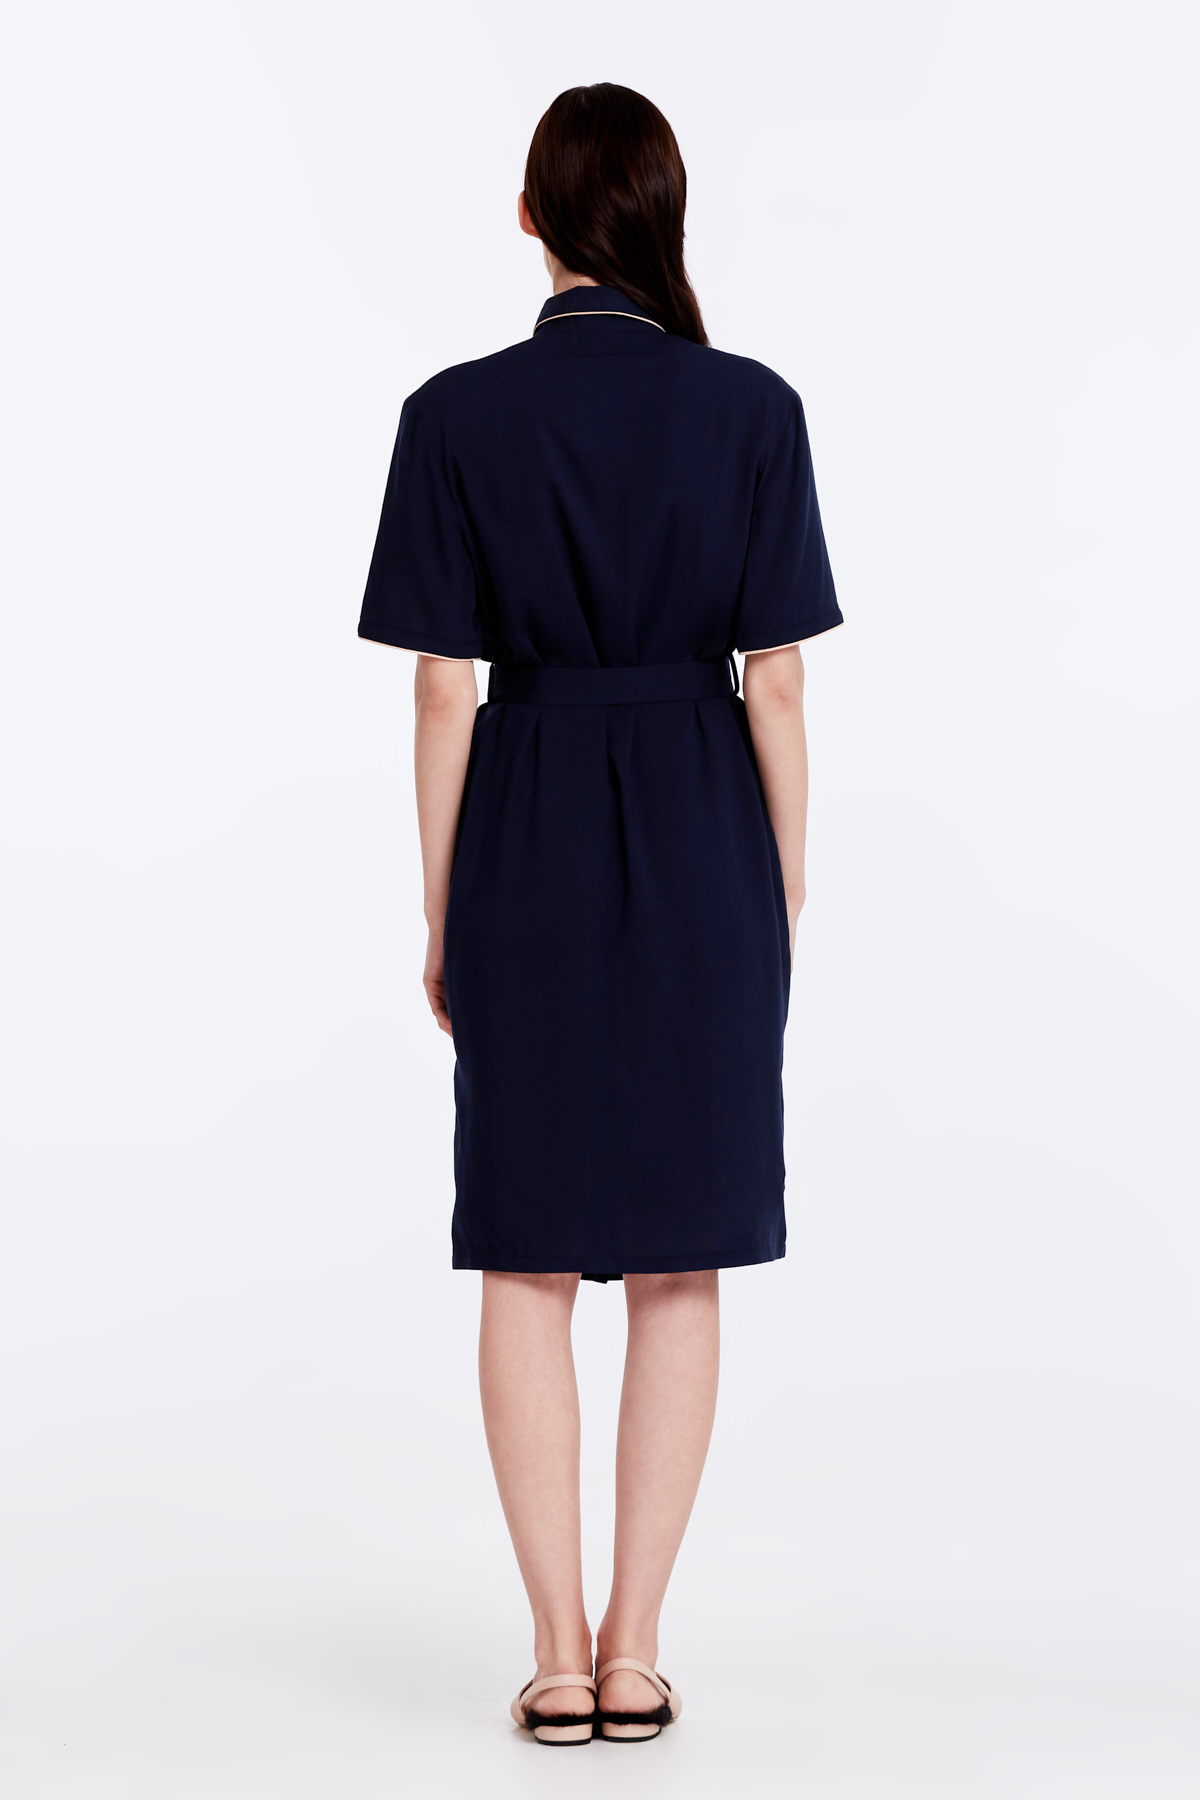 Dark-blue dress with a beige piping, photo 6